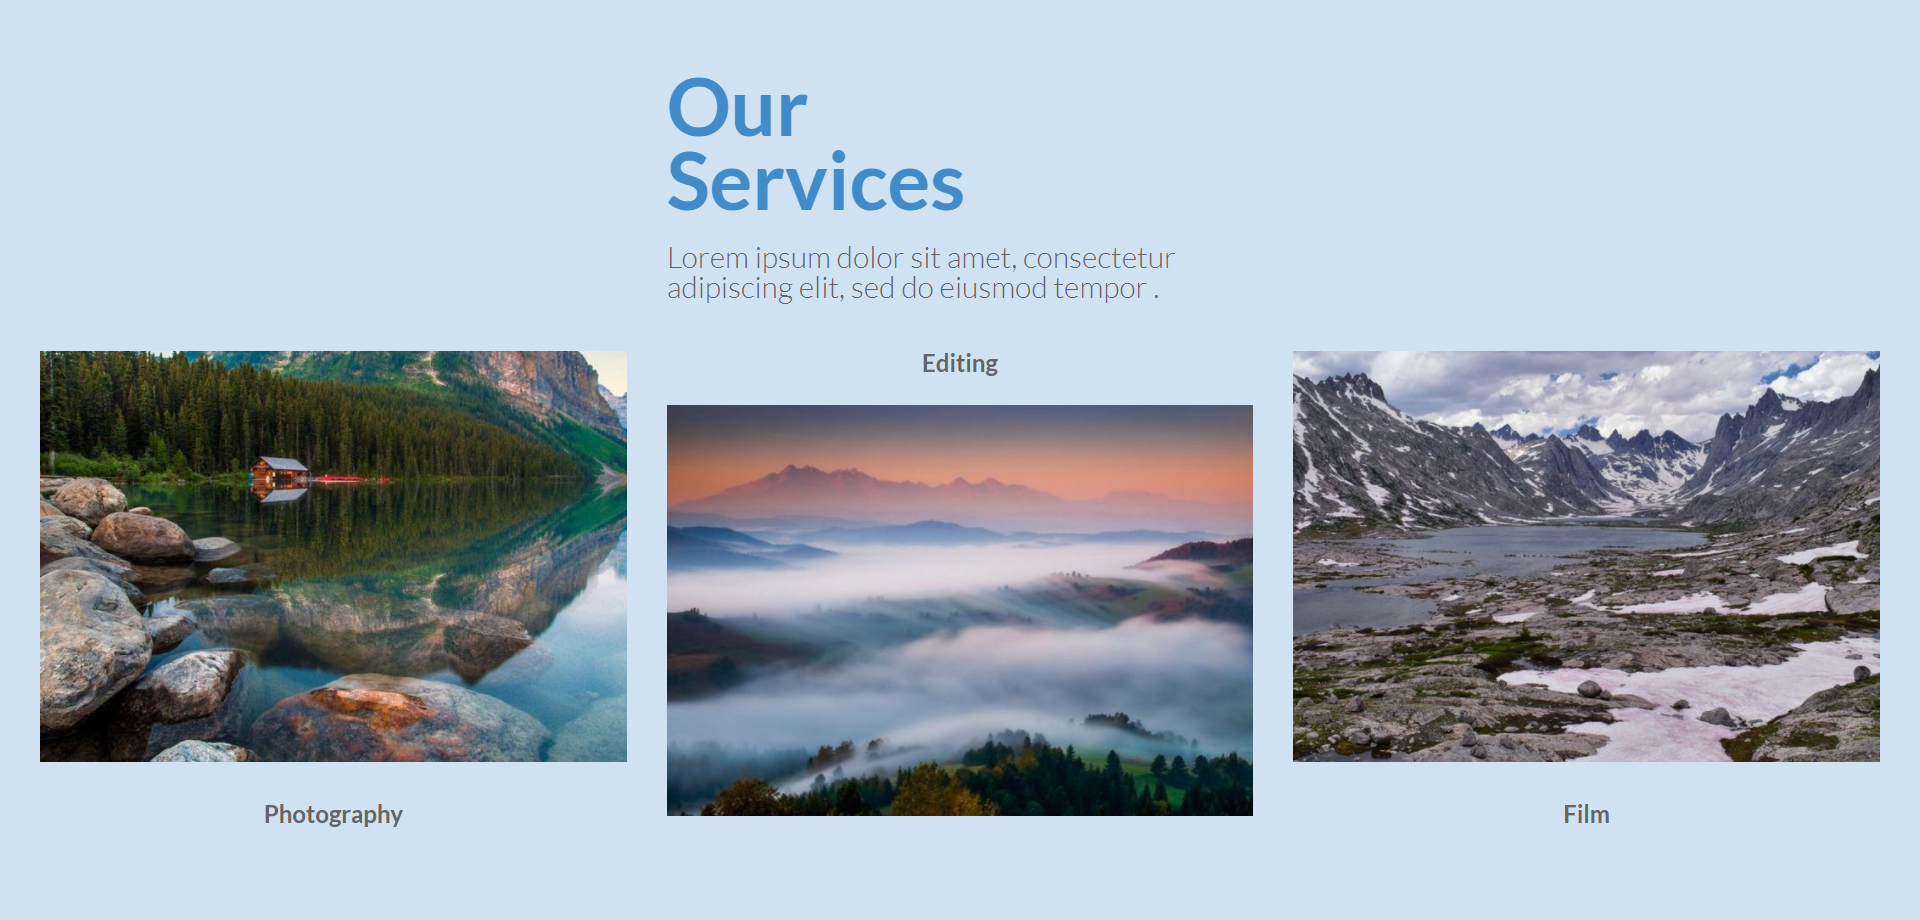 Our Services Section